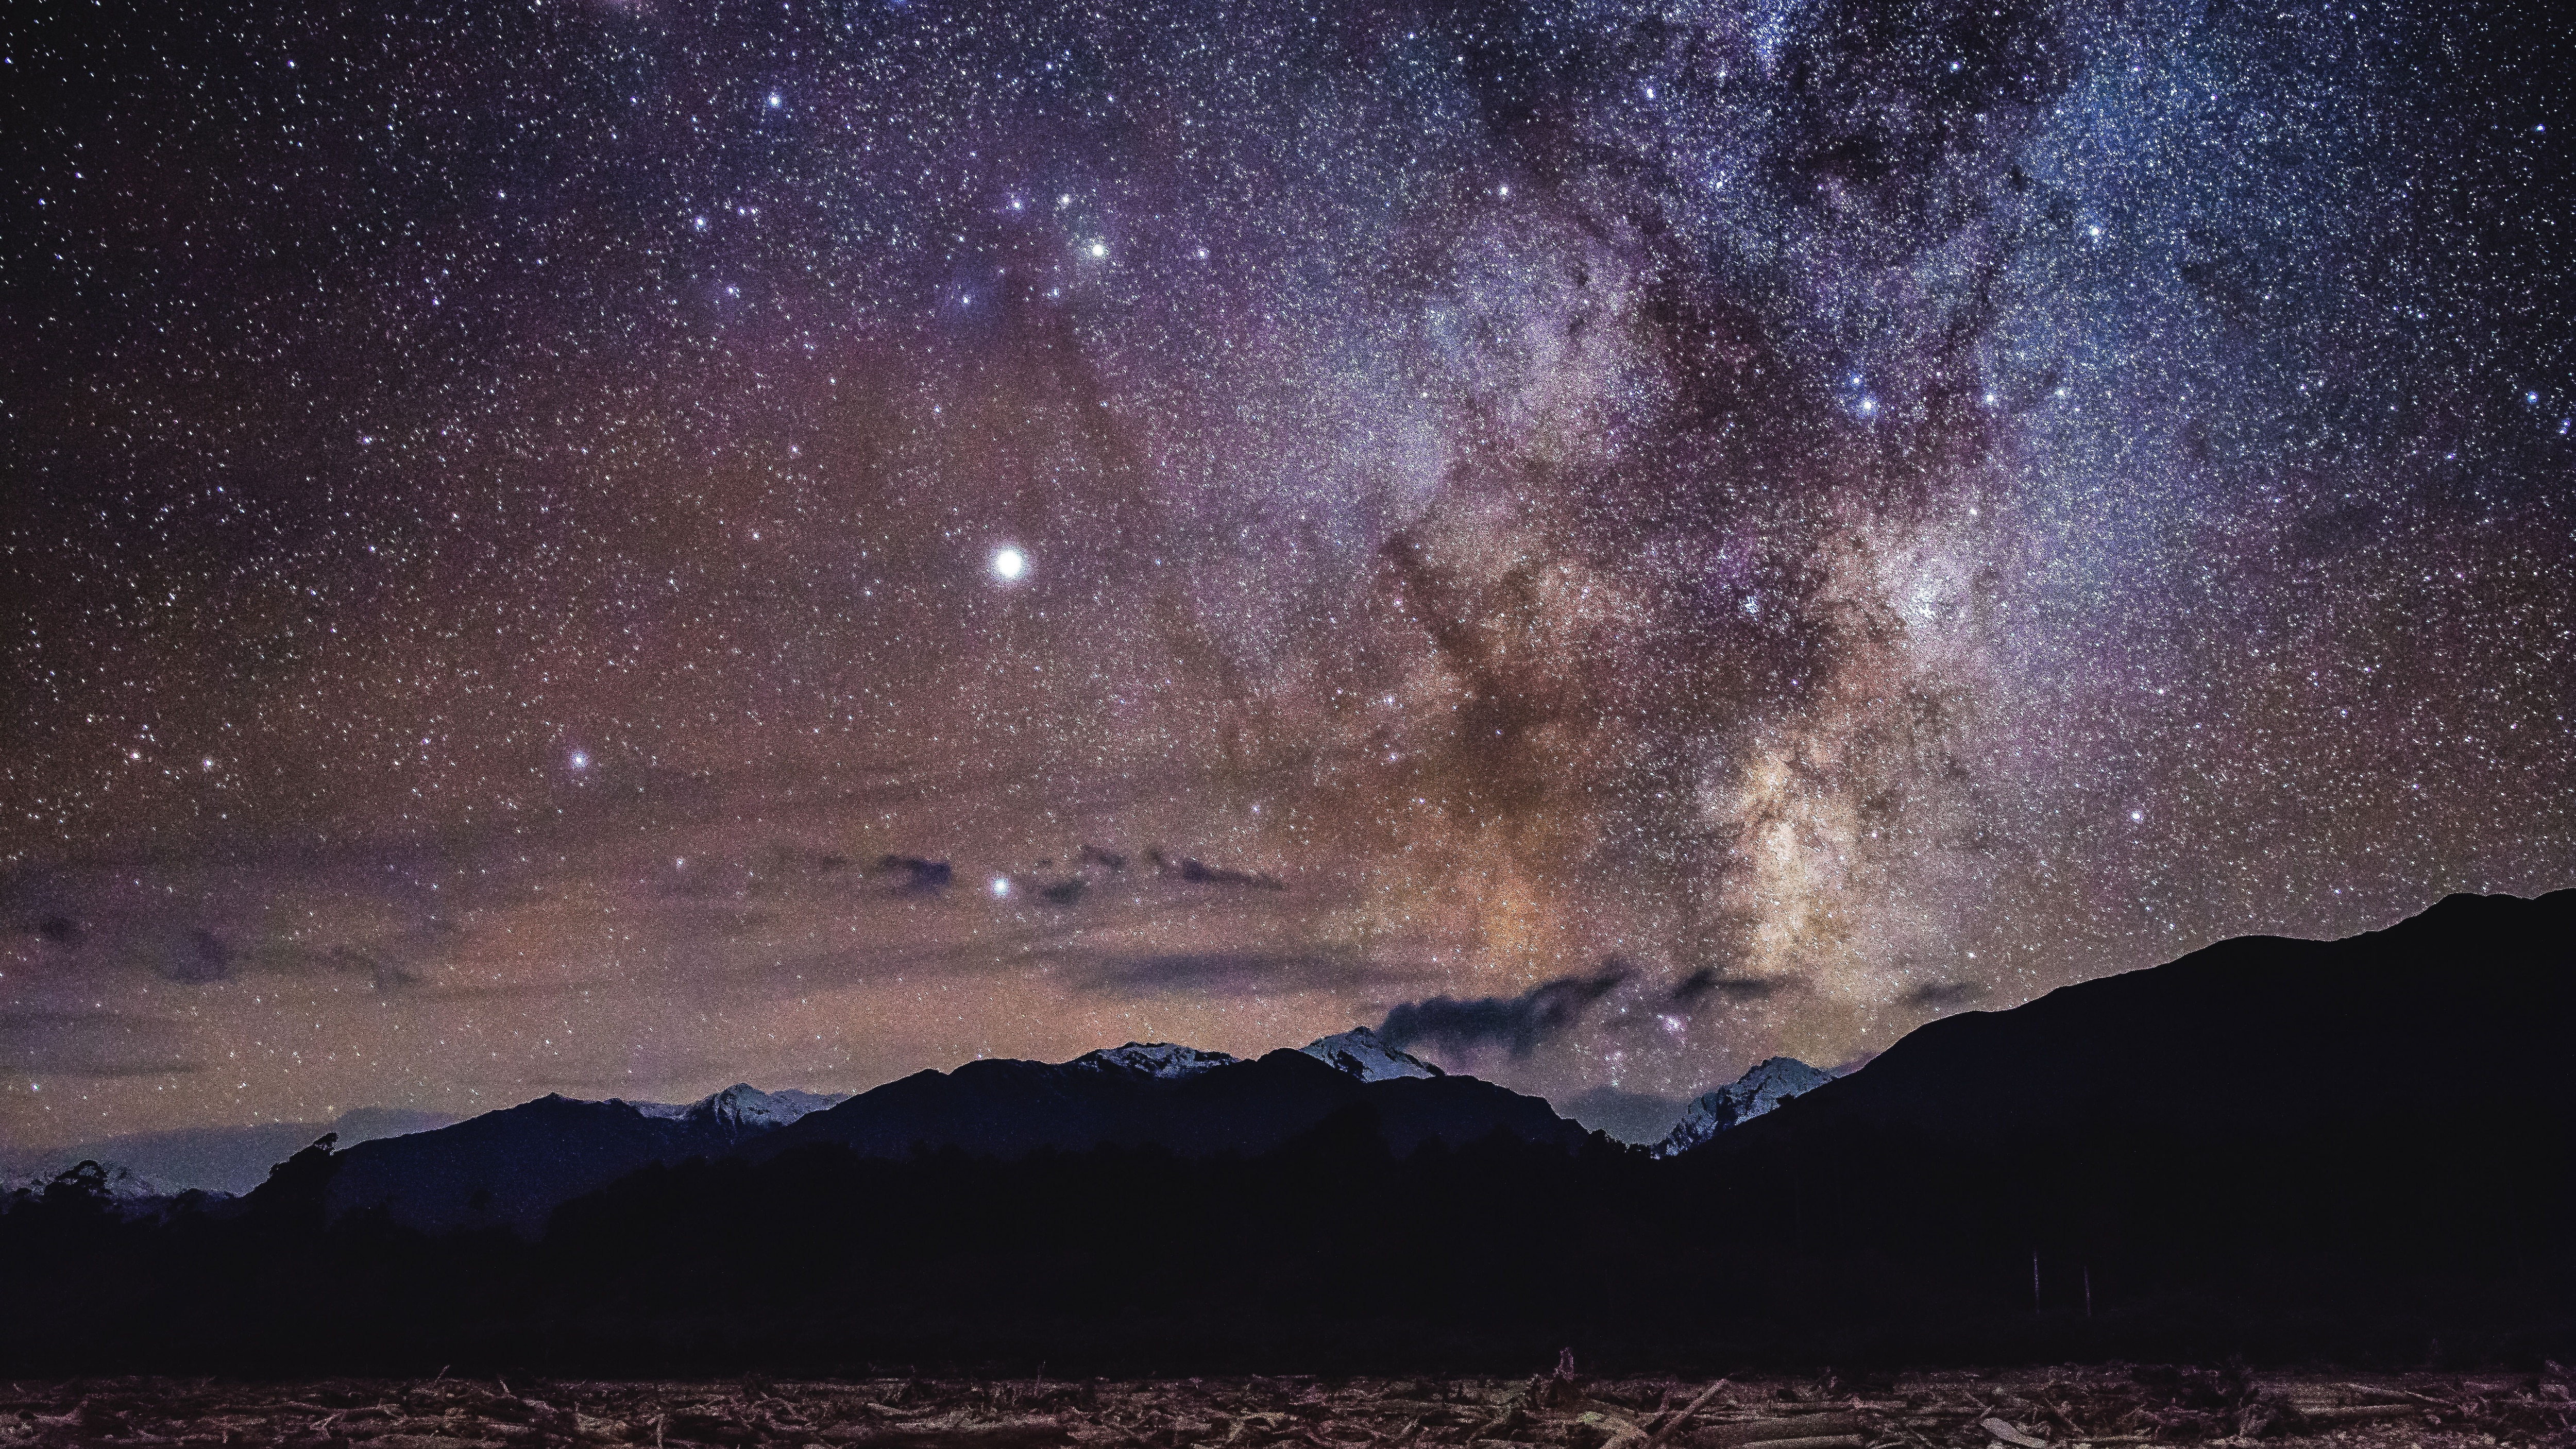 Milky Way over the Southern Alps